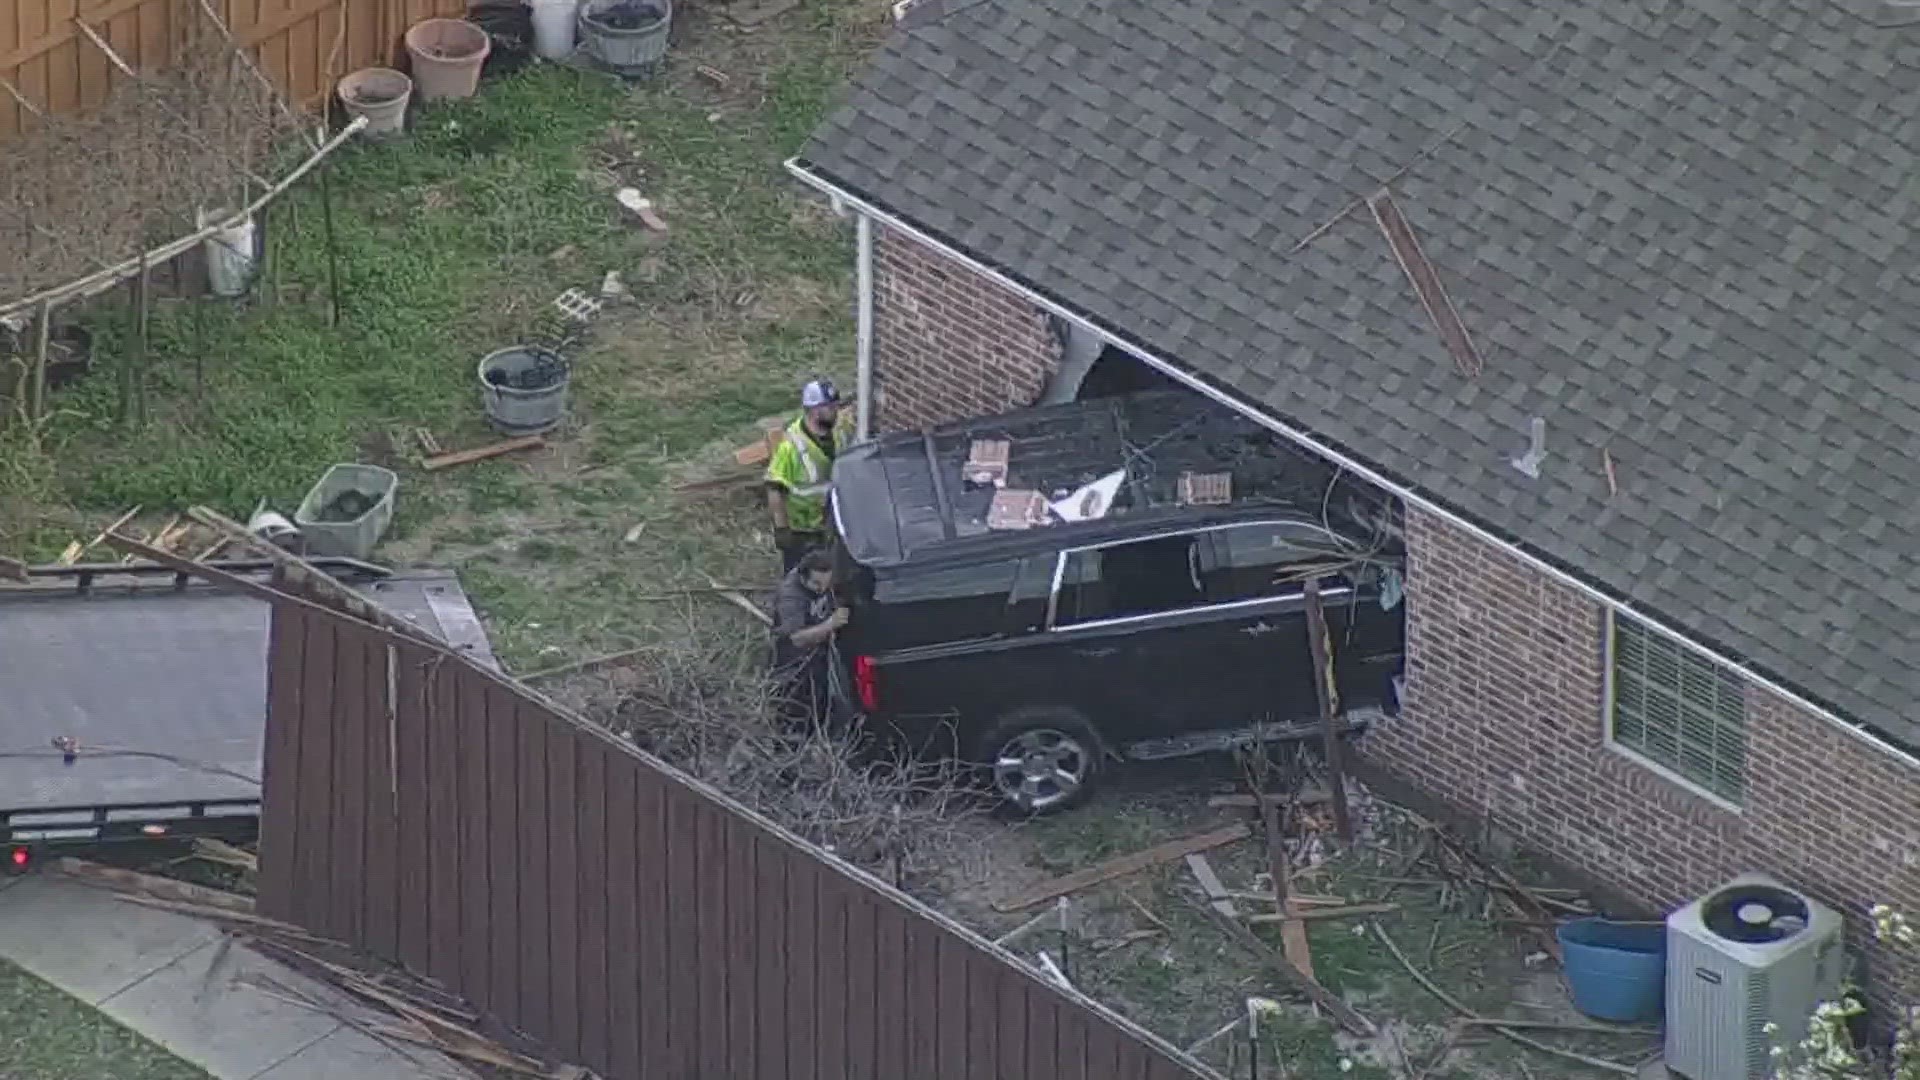 The cause of an SUV barrelling into a home in Rowlett Monday afternoon is under investigation.